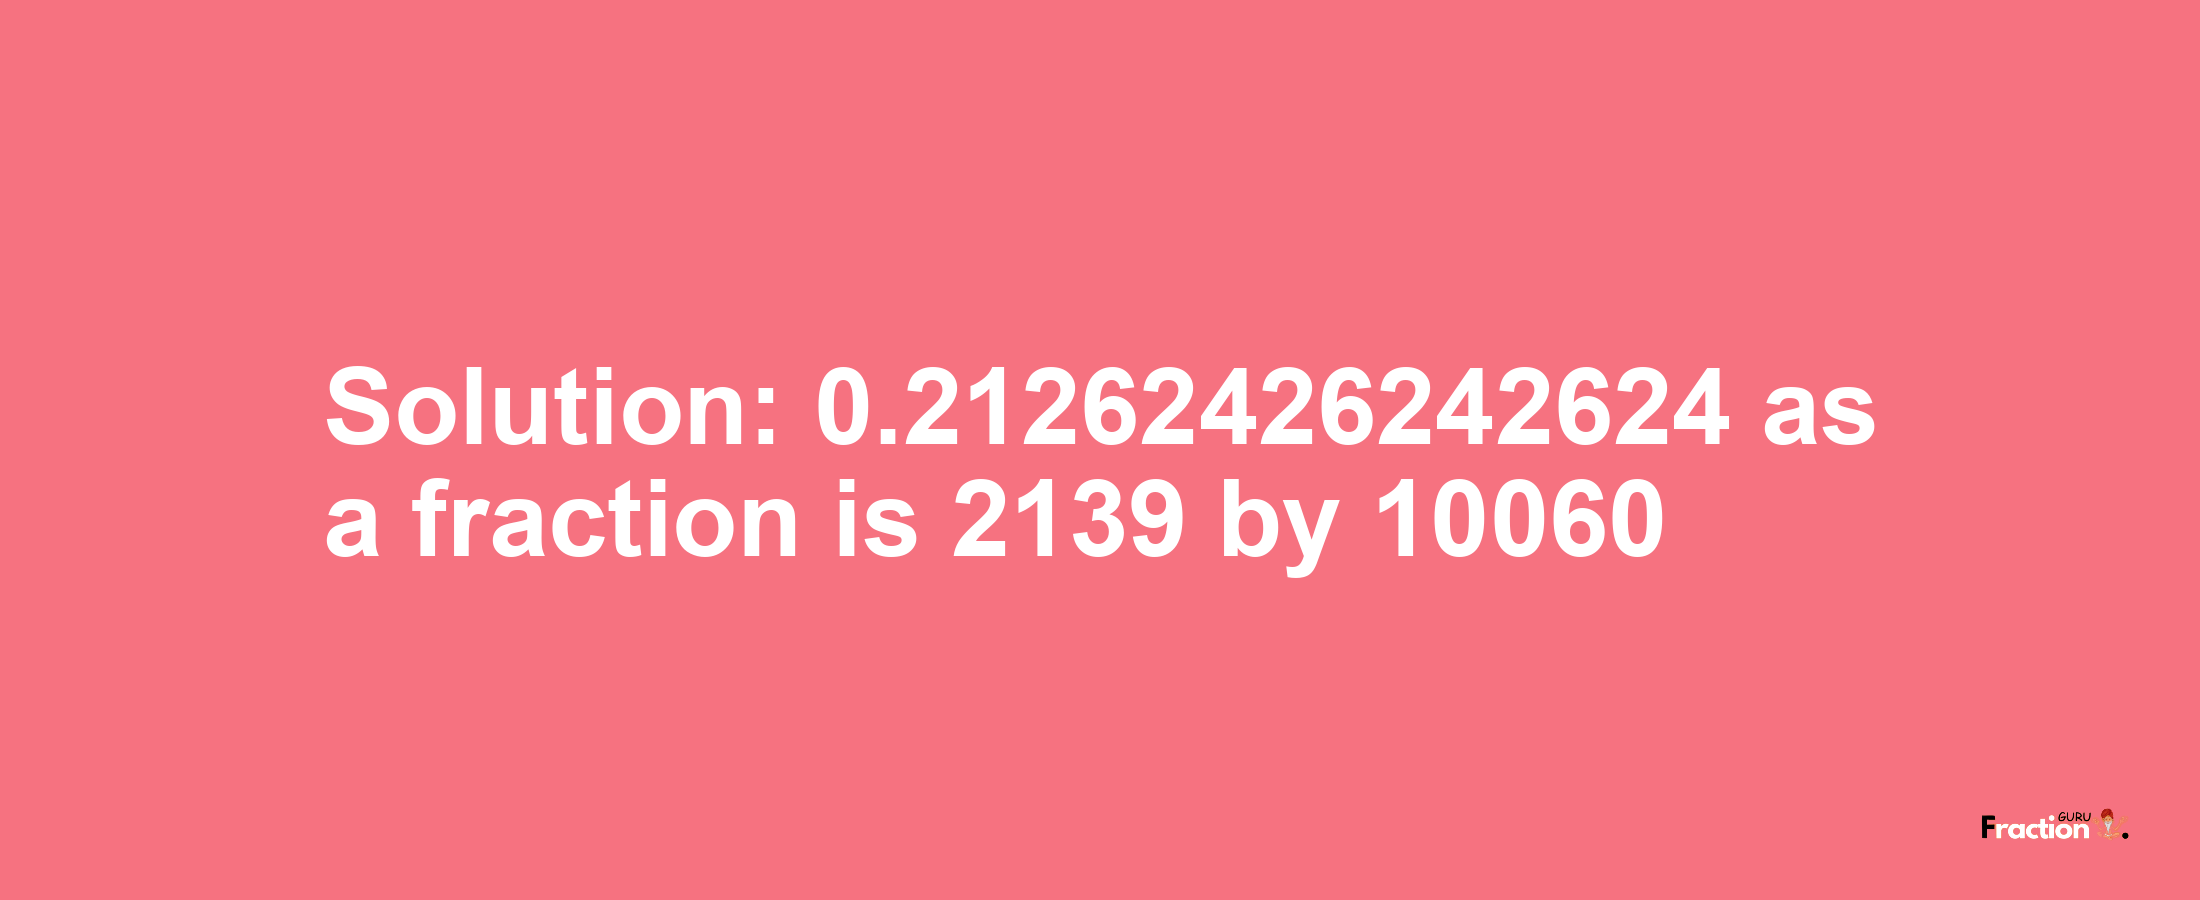 Solution:0.21262426242624 as a fraction is 2139/10060